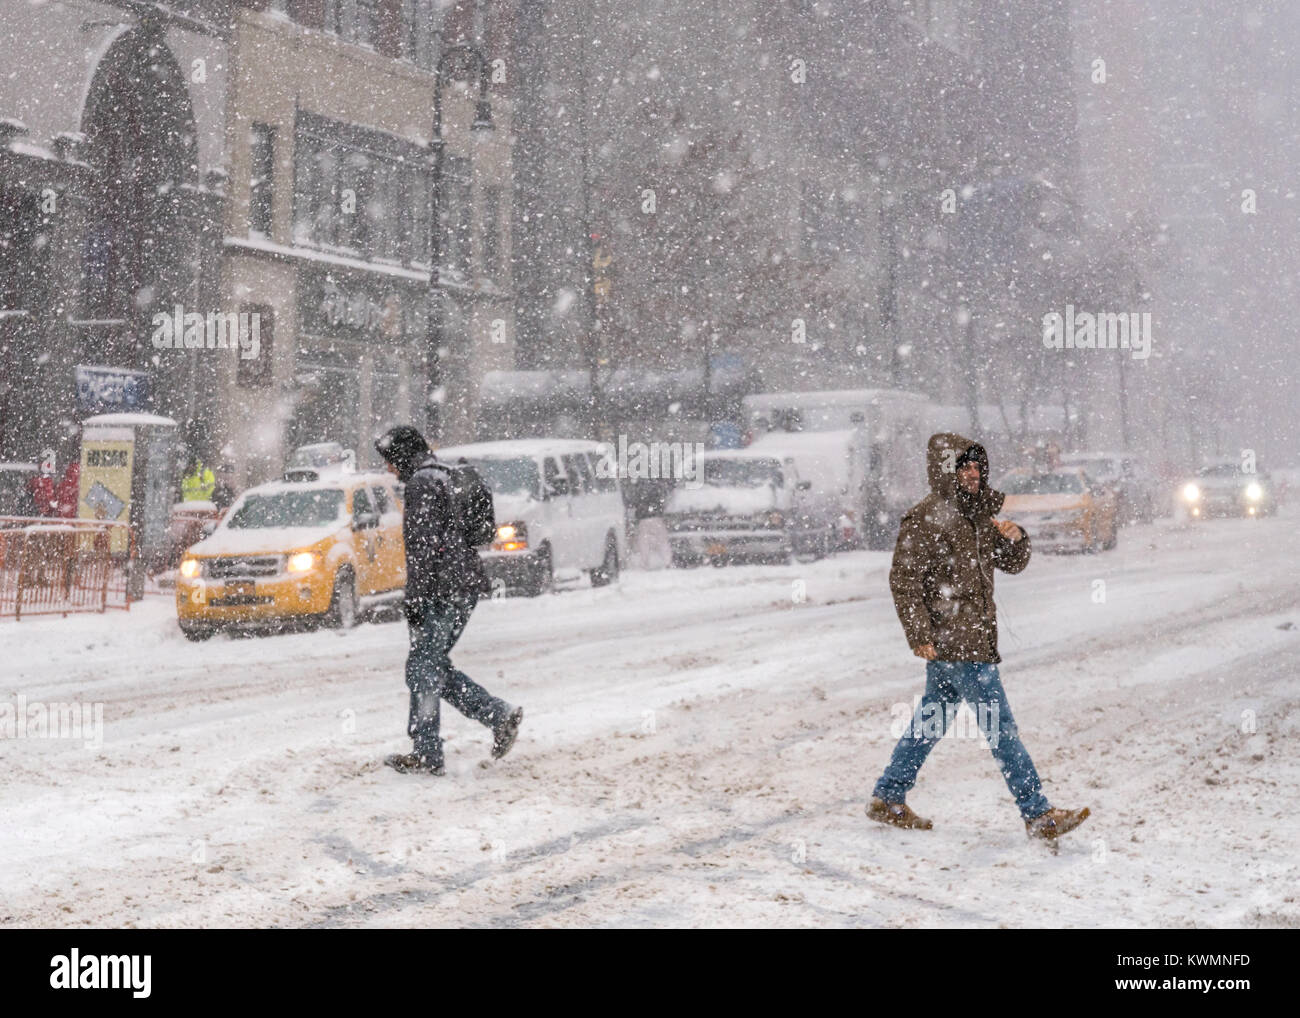 New York, USA, 4 Jan 2018.  People cross 86th Street under a  heavy snowstorm which meteorologists called 'bombogenesis' or 'bomb cyclone',  that brought record snow, bitter cold and strong winds over New York on January 4, 2018. Photo by Enrique Shore/Alamy Live News Stock Photo